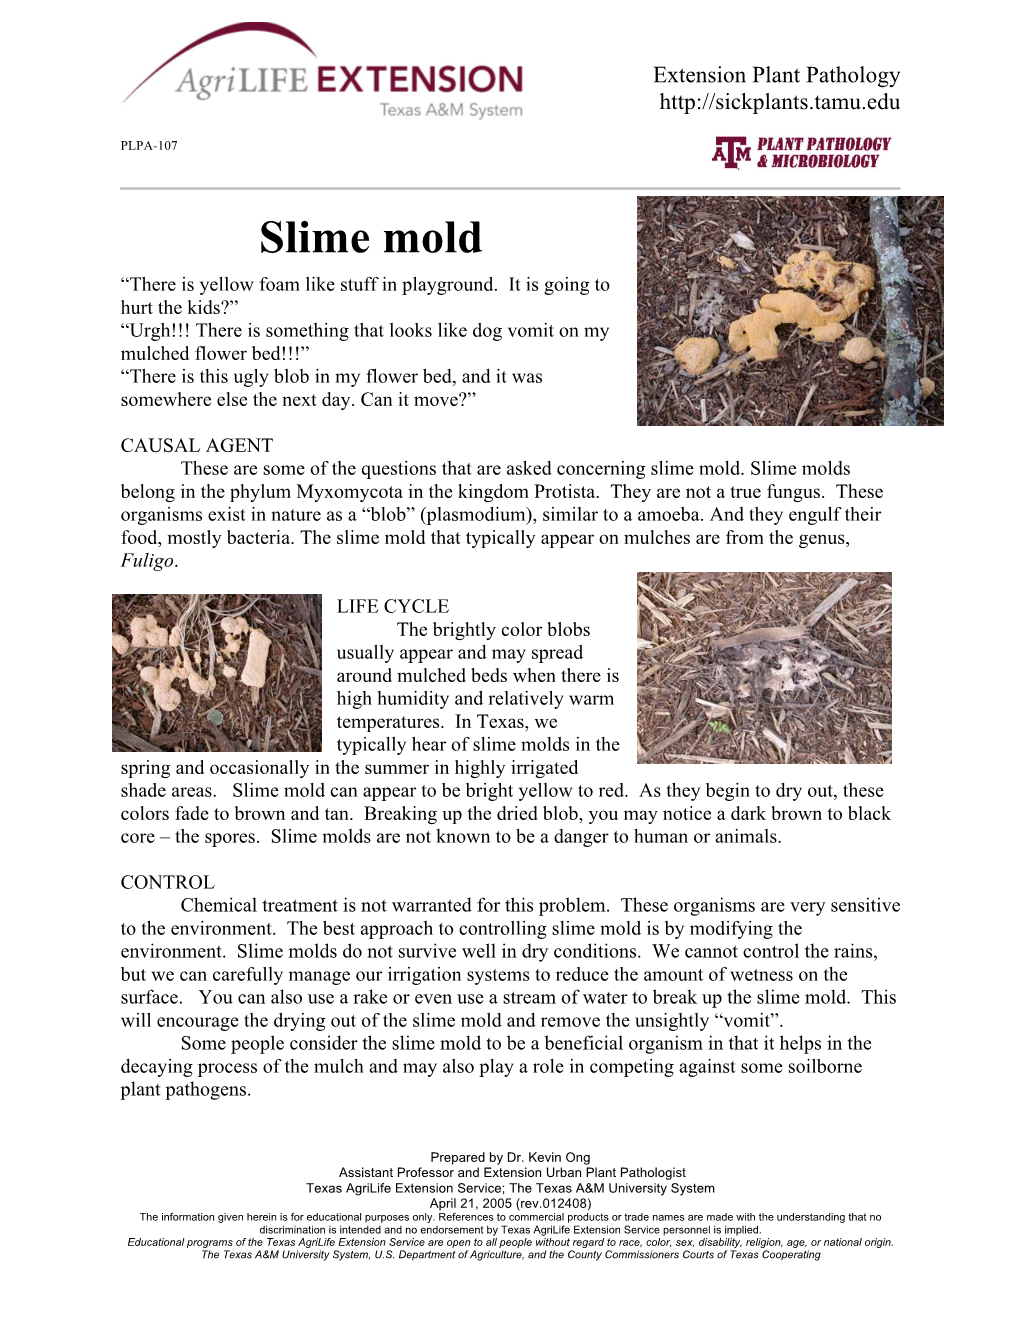 Slime Mold “There Is Yellow Foam Like Stuff in Playground